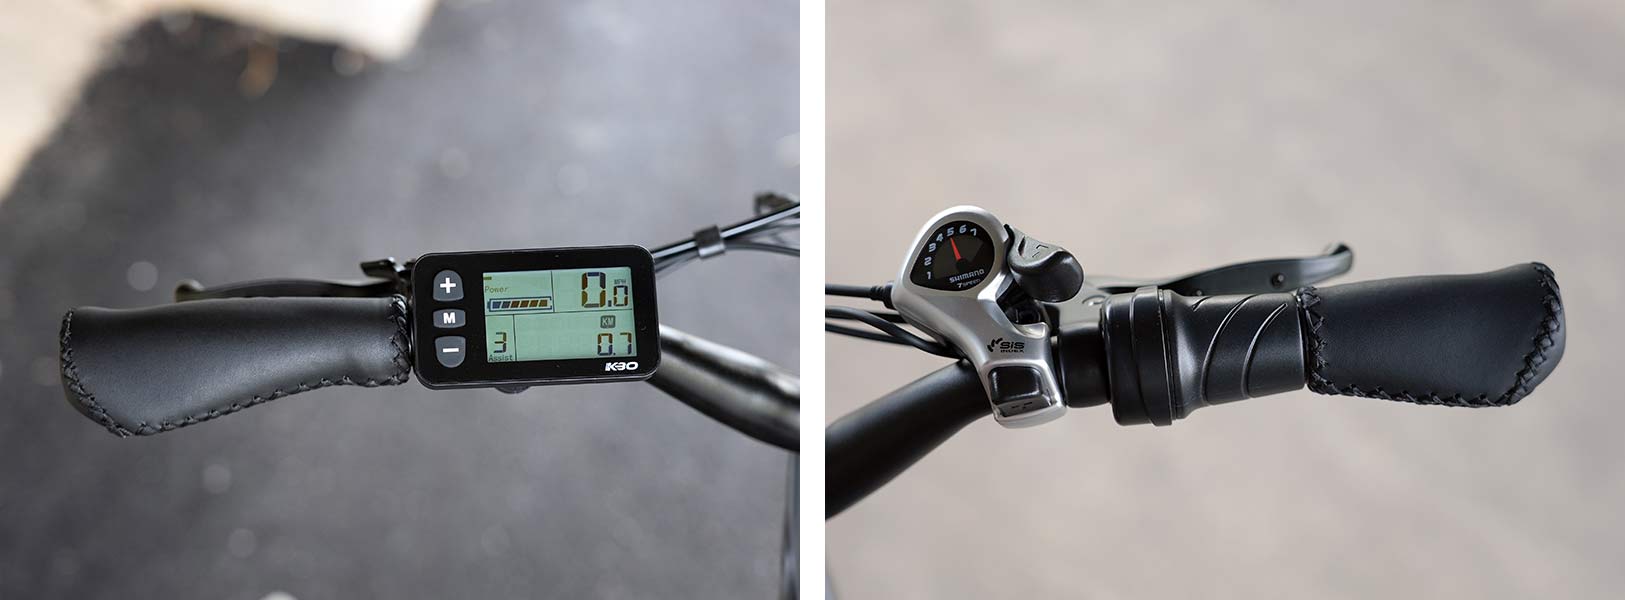 kbo breeze commuter e-bike controls and brake levers with integrated bell